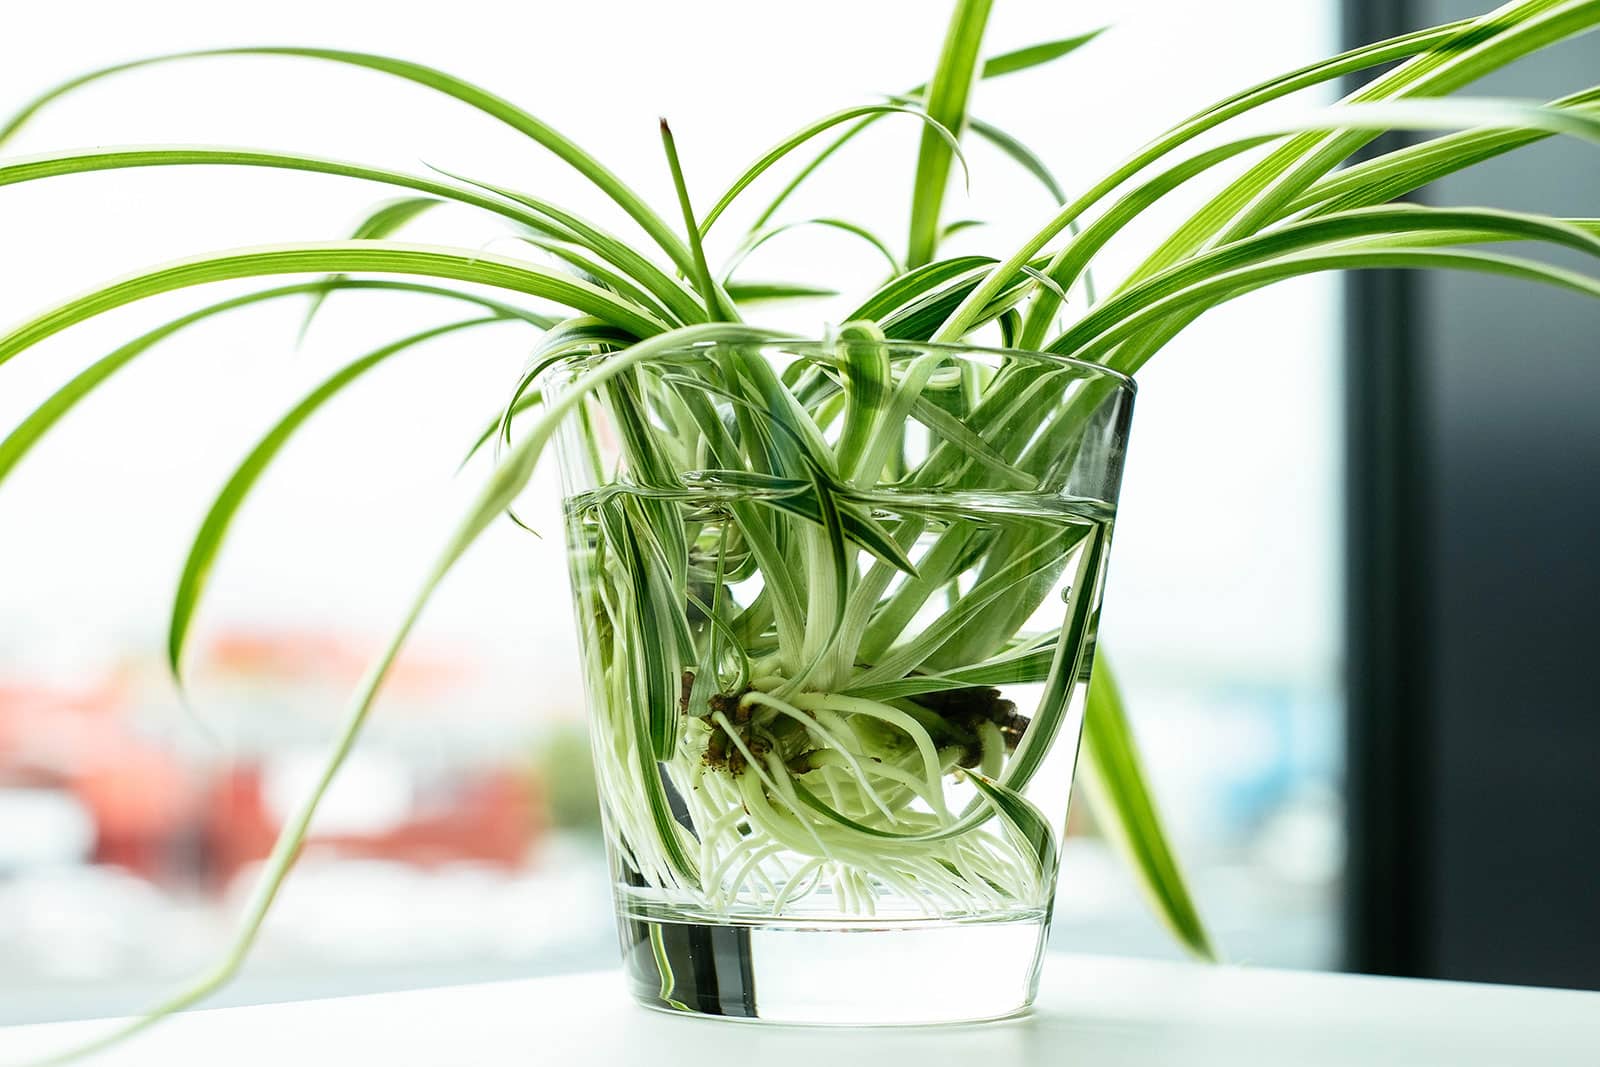 Spider plant growing in water